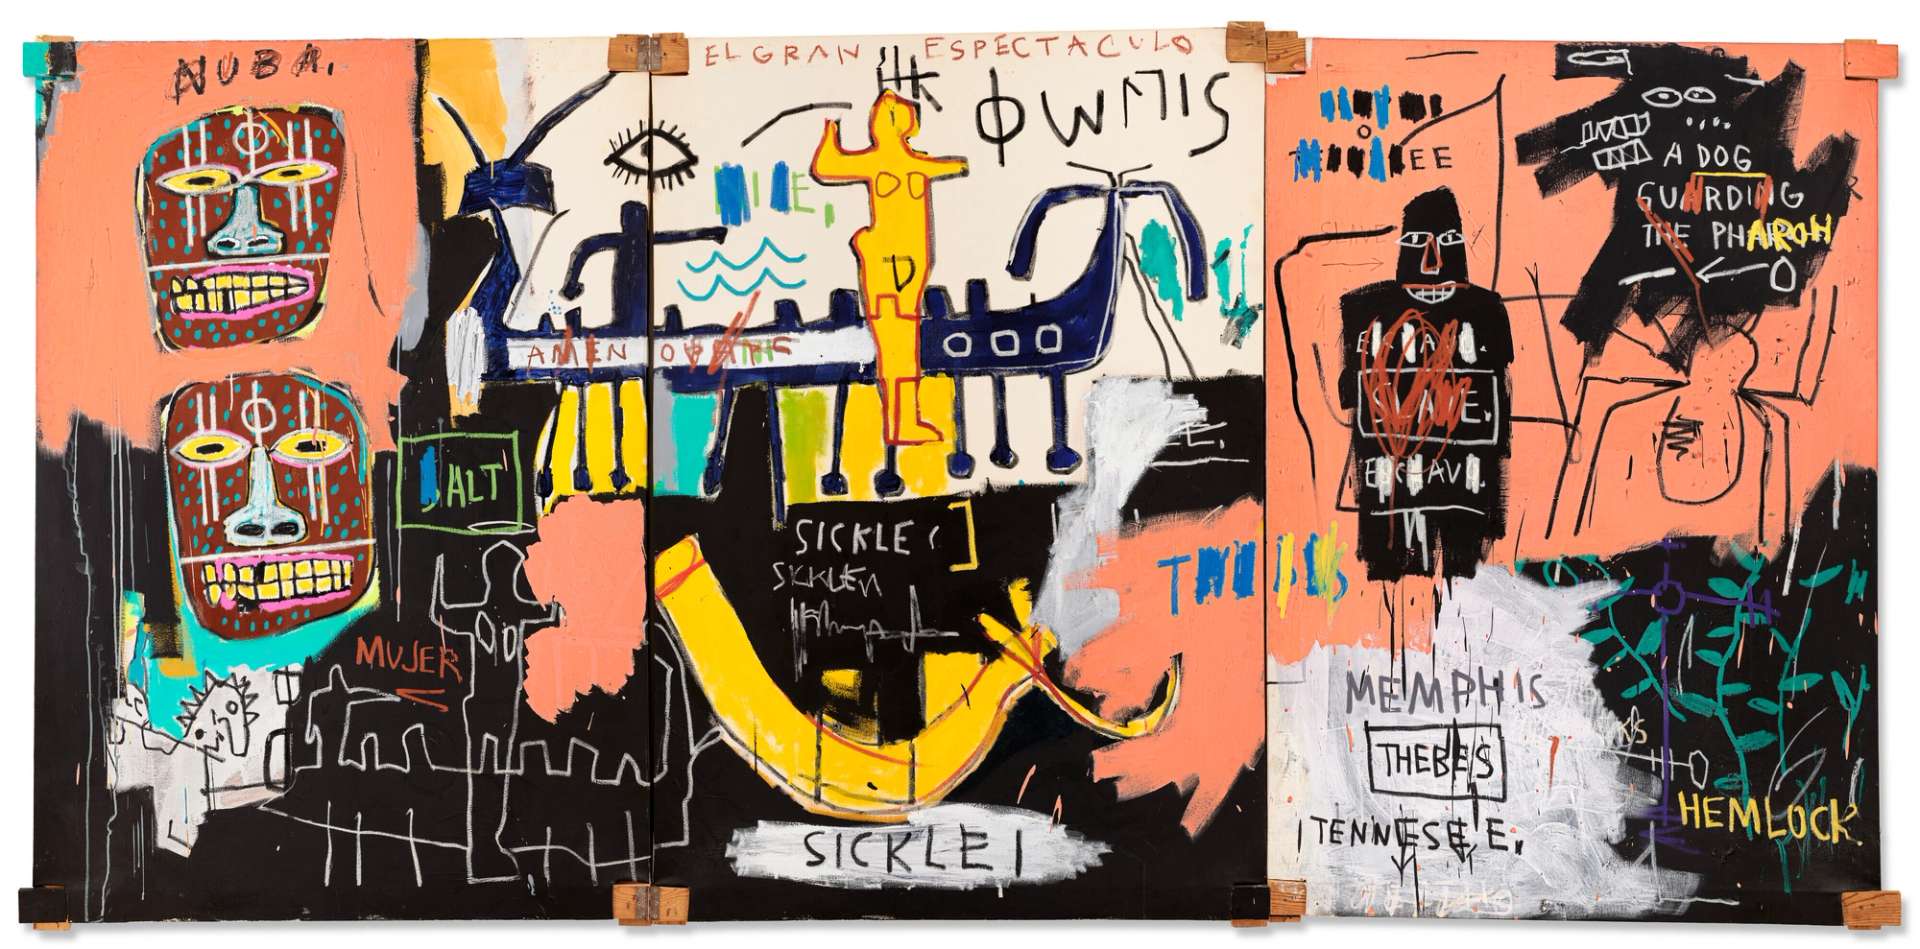 A landscape painting by Jean-Michel Basquiat featuring African masks, sketches of figures, insects, and plants with text written about the composition.